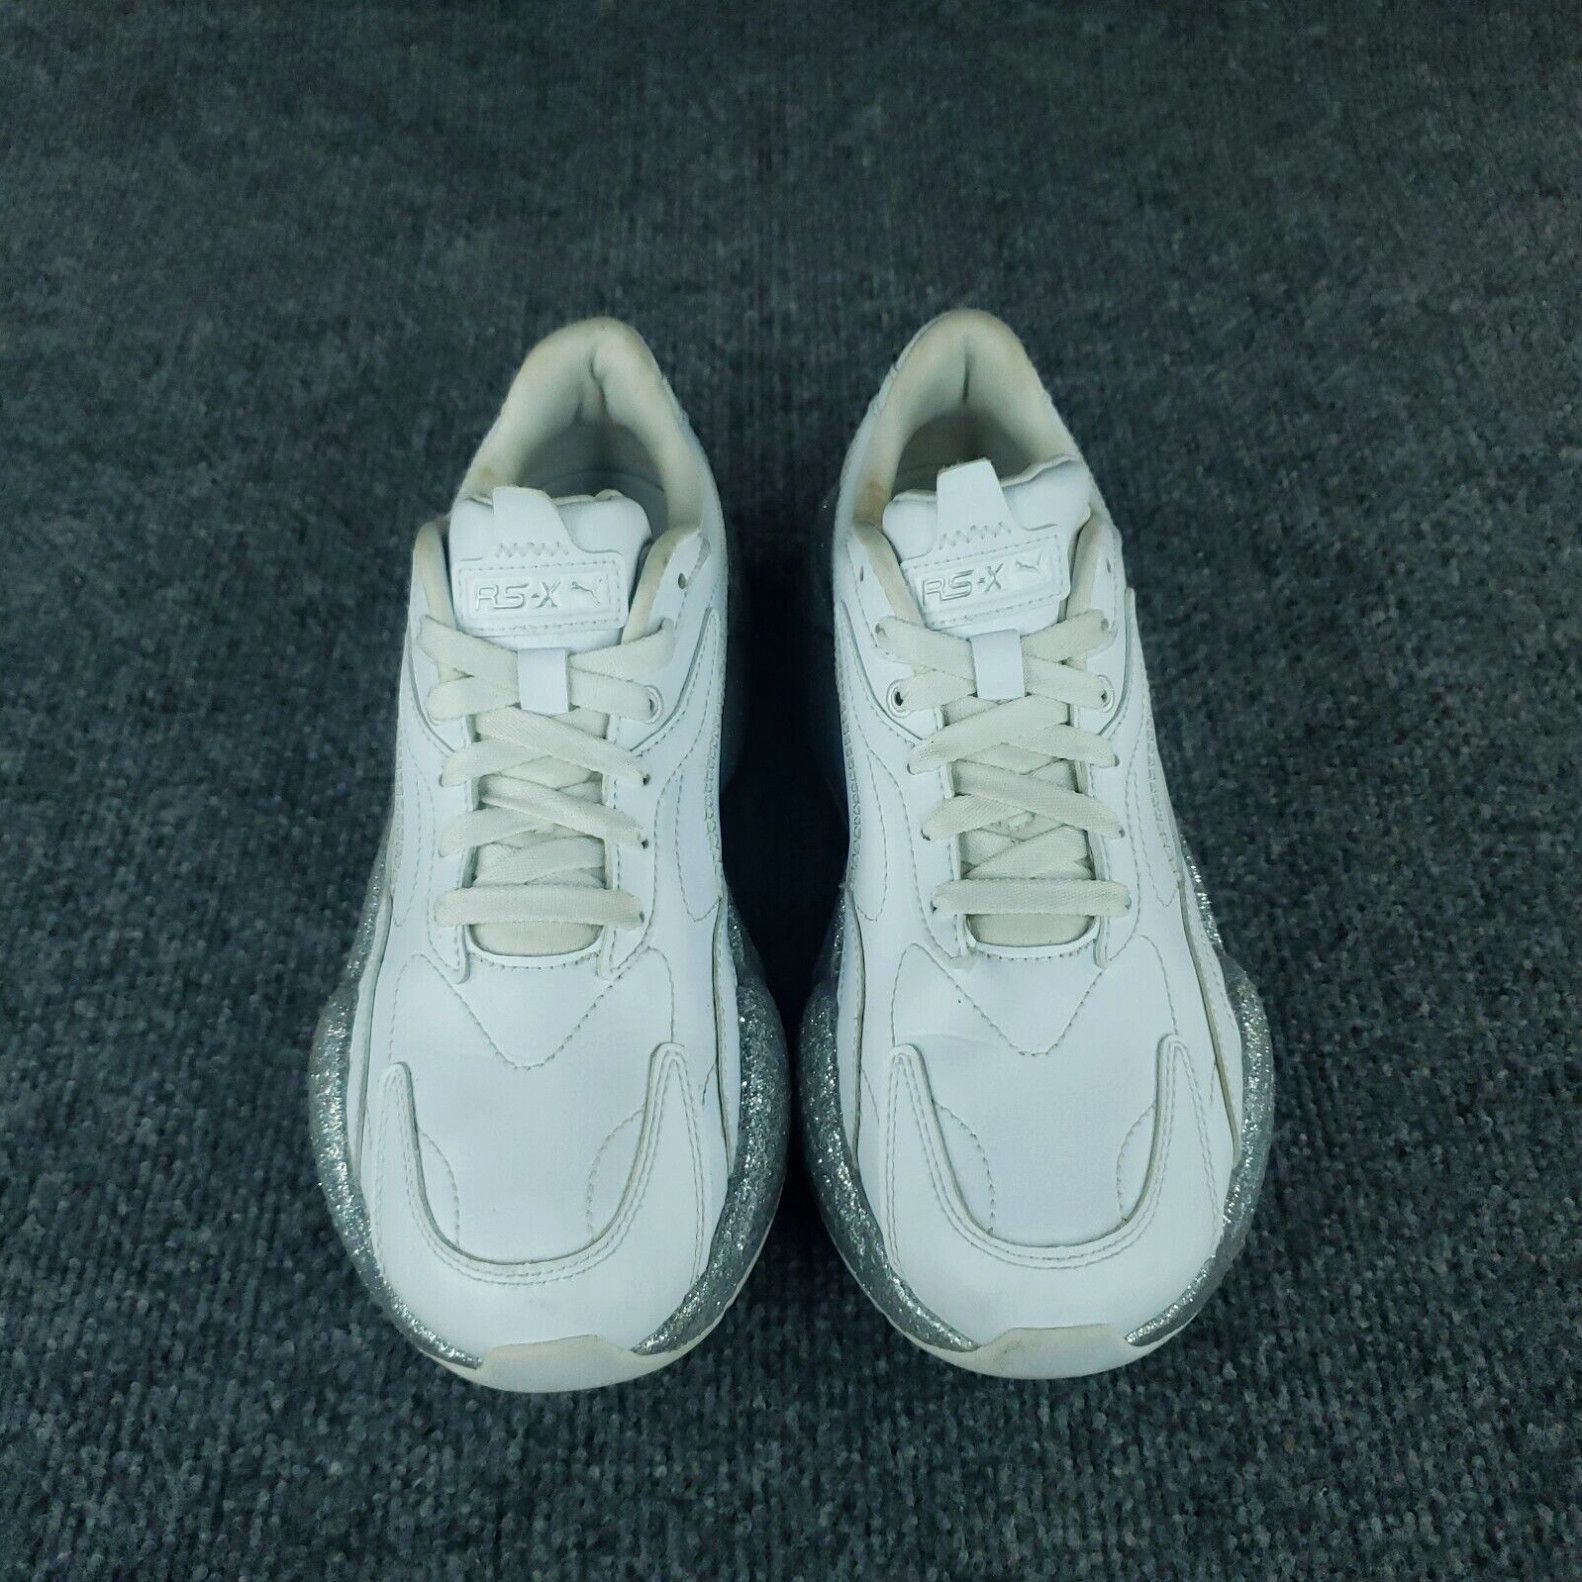 Puma Puma RS X3 Glitz Shoes Womens 8.5 White Silver Running Sneakers 372647-01 Size ONE SIZE - 3 Thumbnail